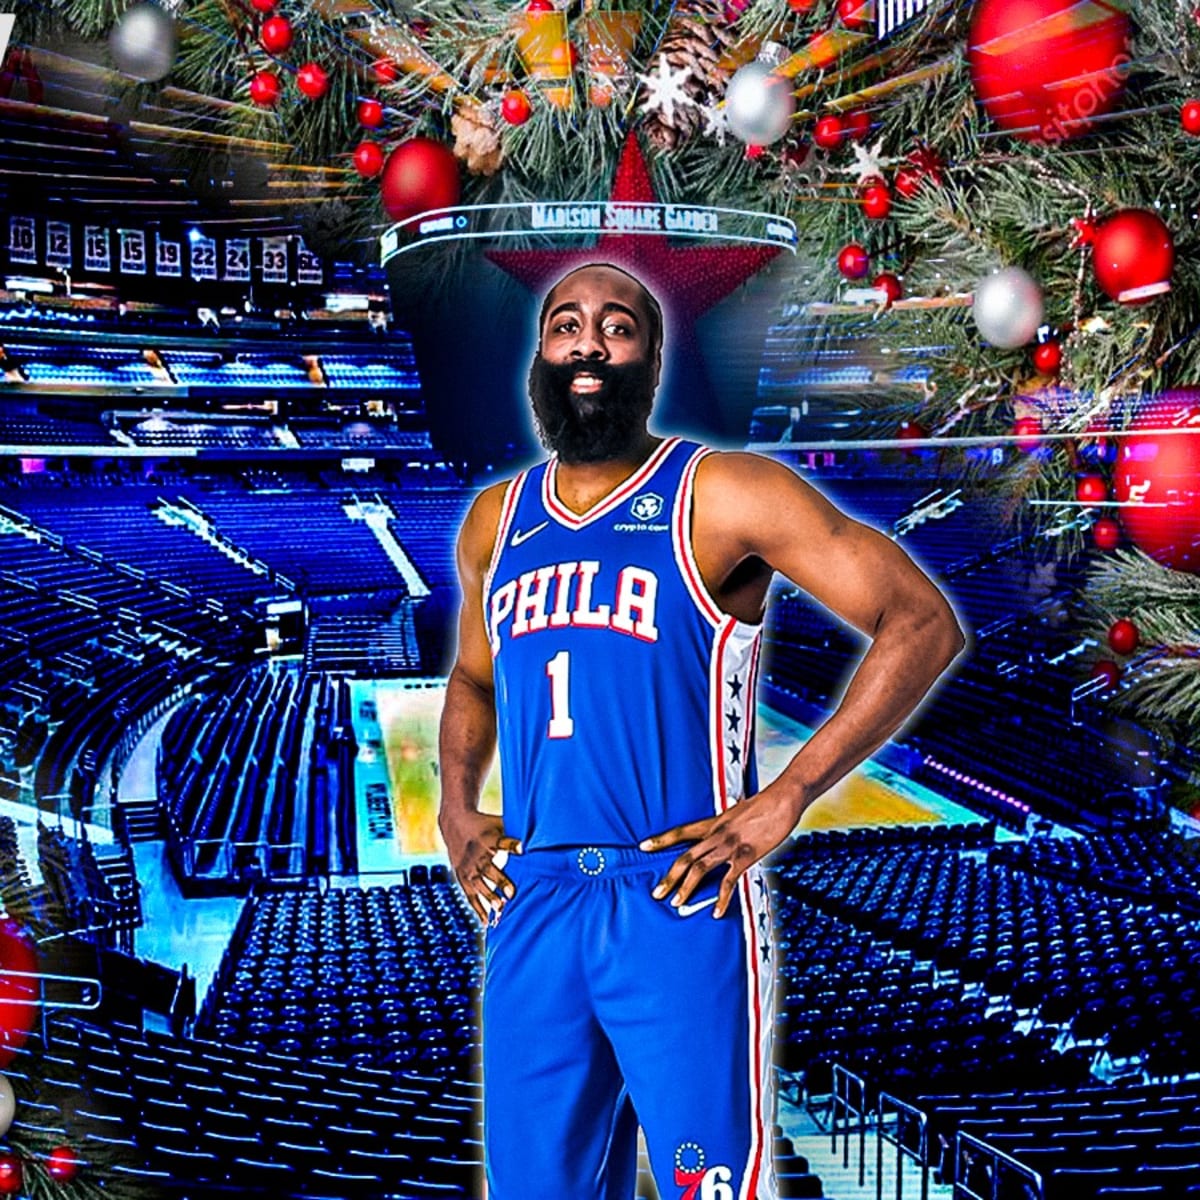 James Harden pulls up on Christmas Day at MSG looking like the Grinch  cousin 🤣.. 